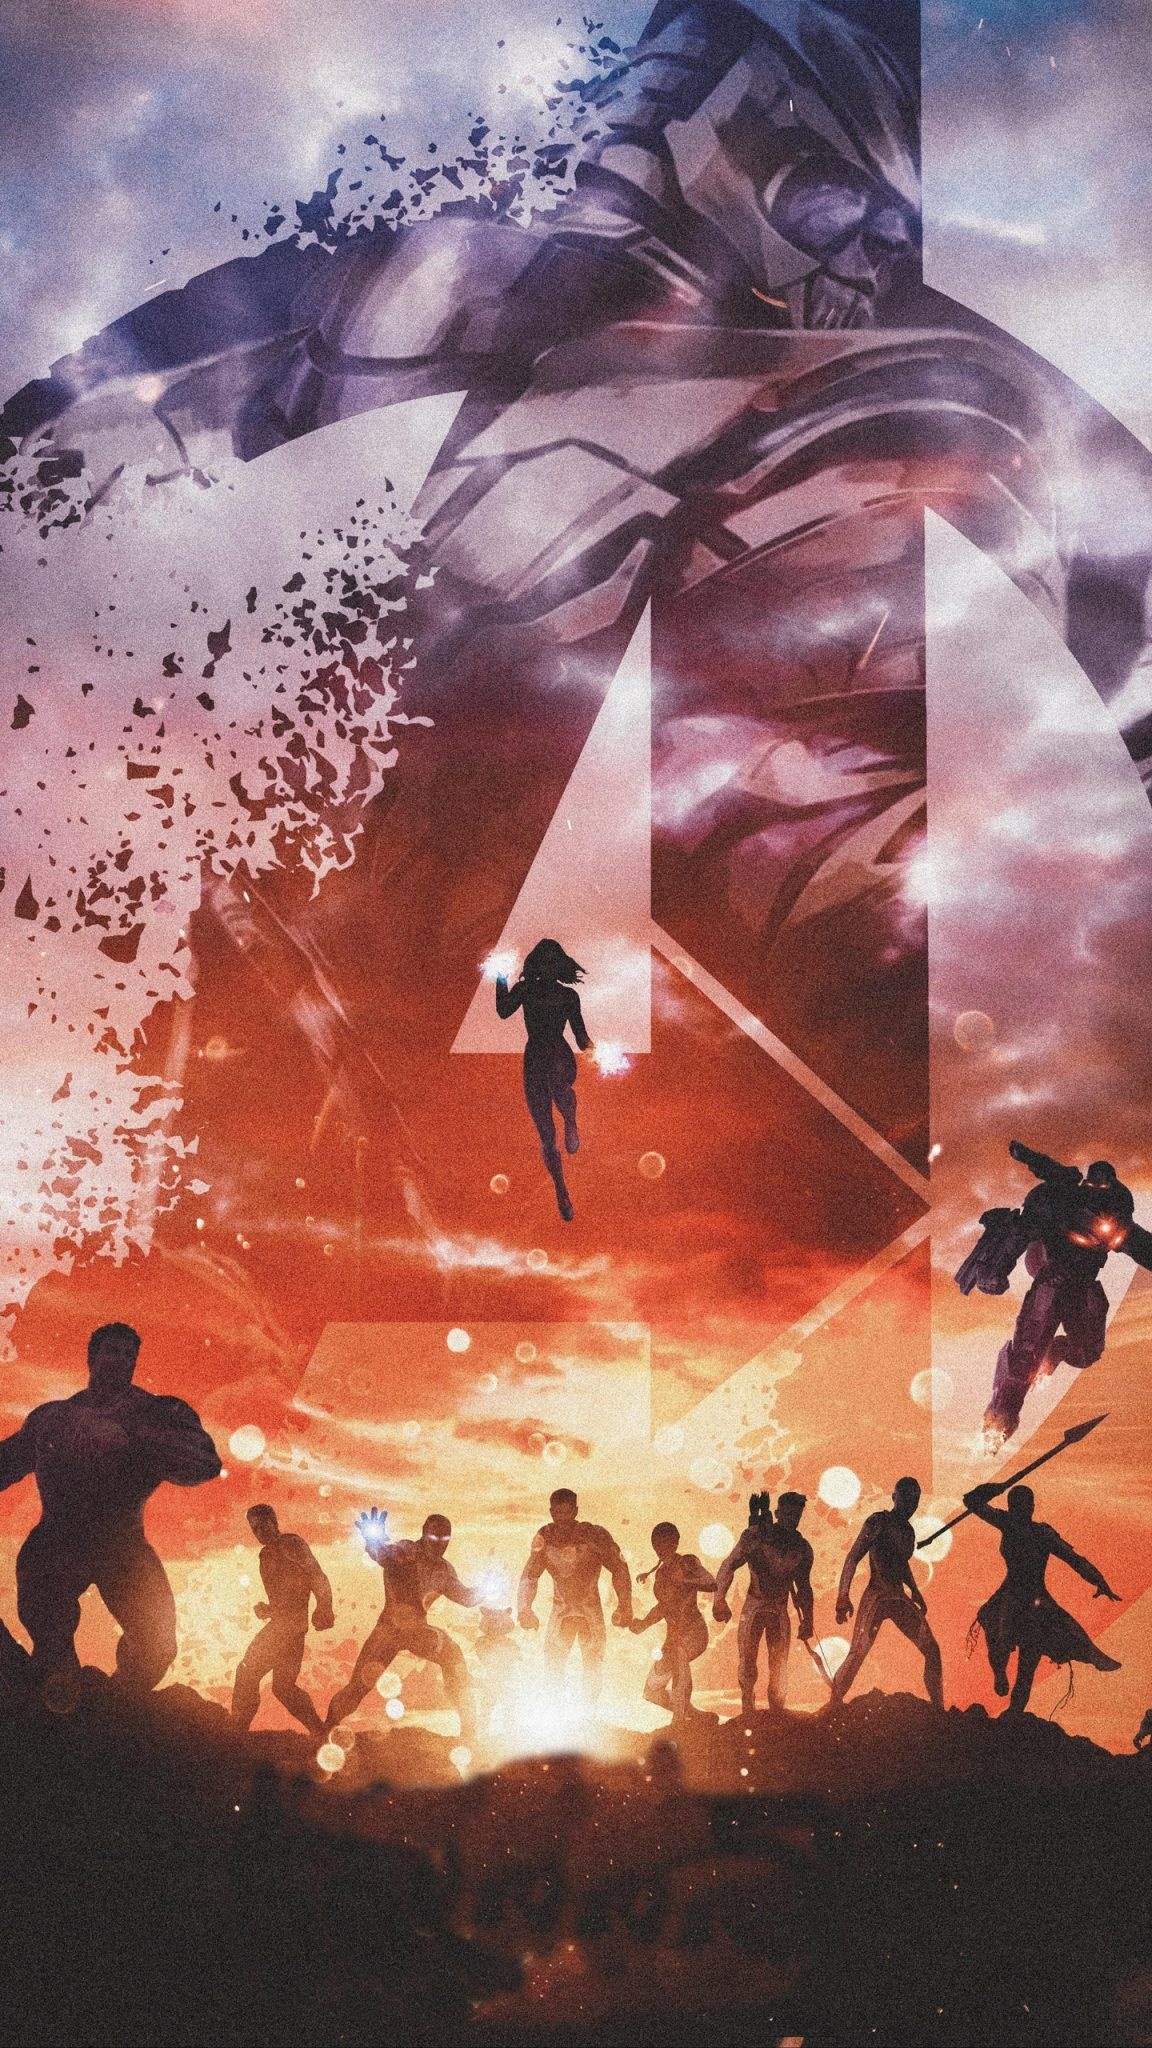 MCU (Comics), Avengers mobile wallpapers, Pinterest boards, Marvel movie posters, 1160x2050 HD Phone